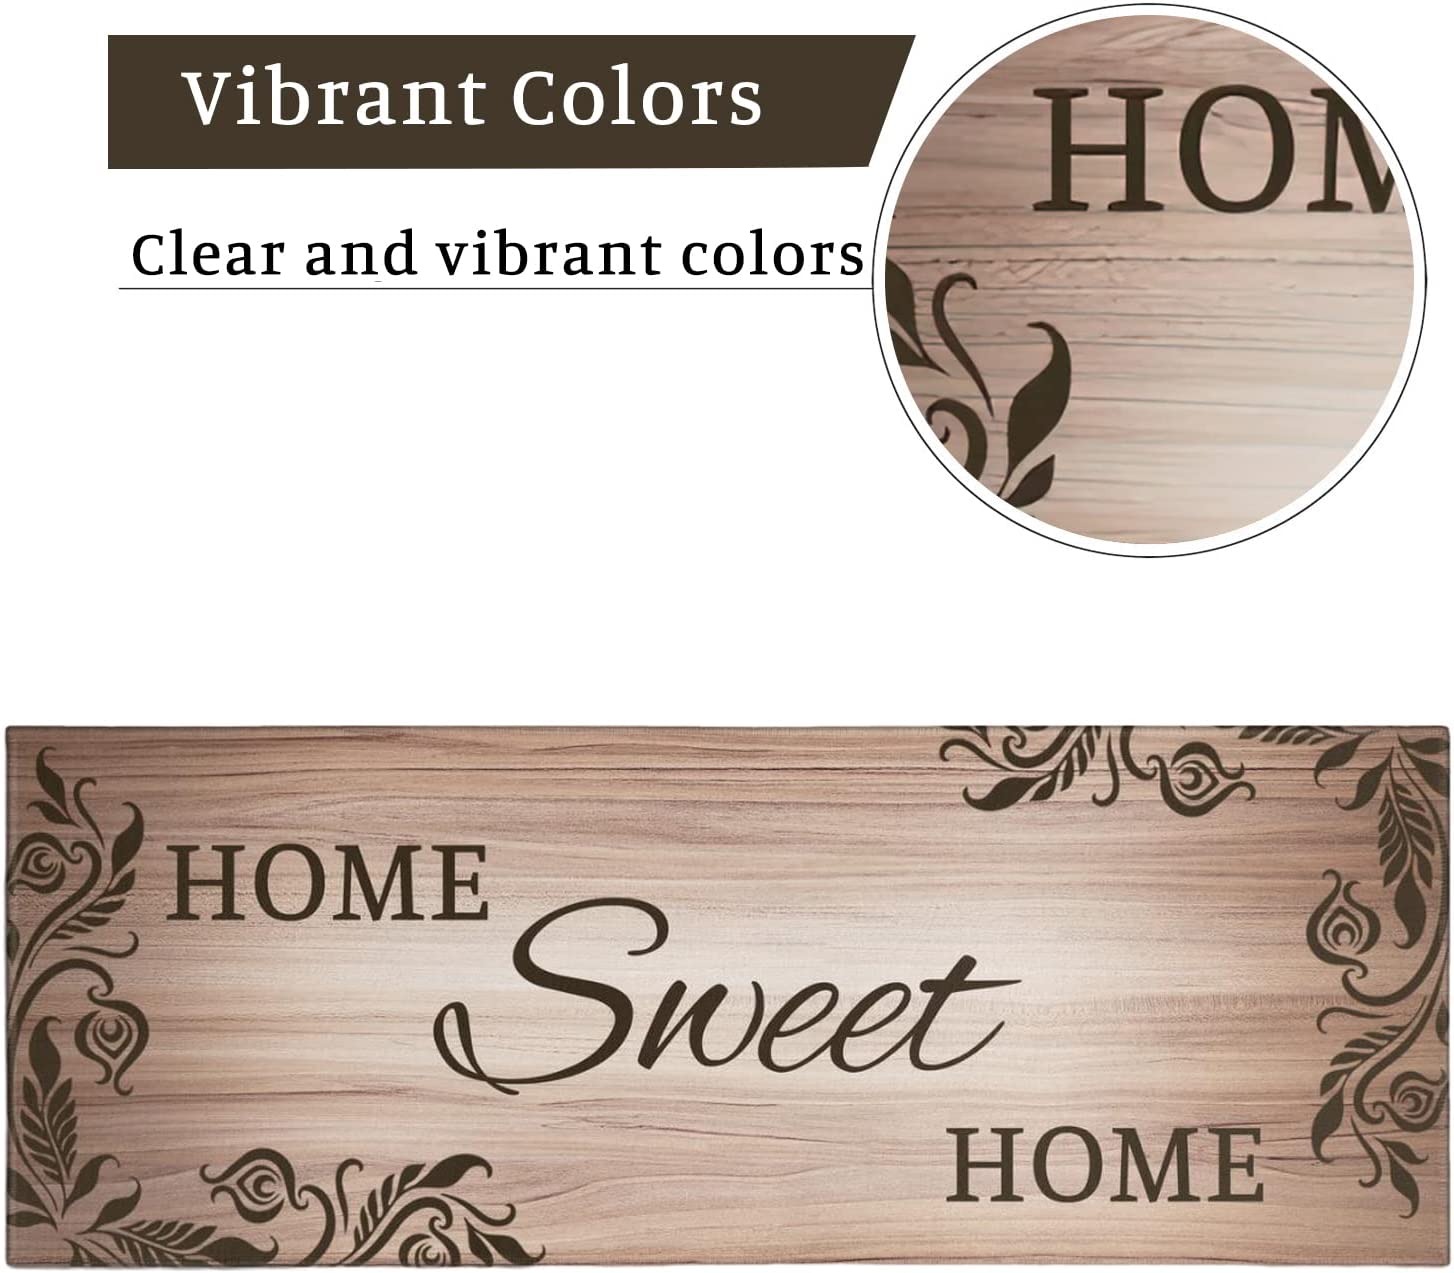 Kitchen Mats Floor Home Sweet Home - Kitchen Mat Set of 2, Brown Kitchen Rug, Farmhouse Kitchen Rugs for Kitchen Sink Area, Kitchen Sink Rugs and Mats, Kitchen Rugs with Words, 17x24 and 17x48 Inch - image 5 of 5